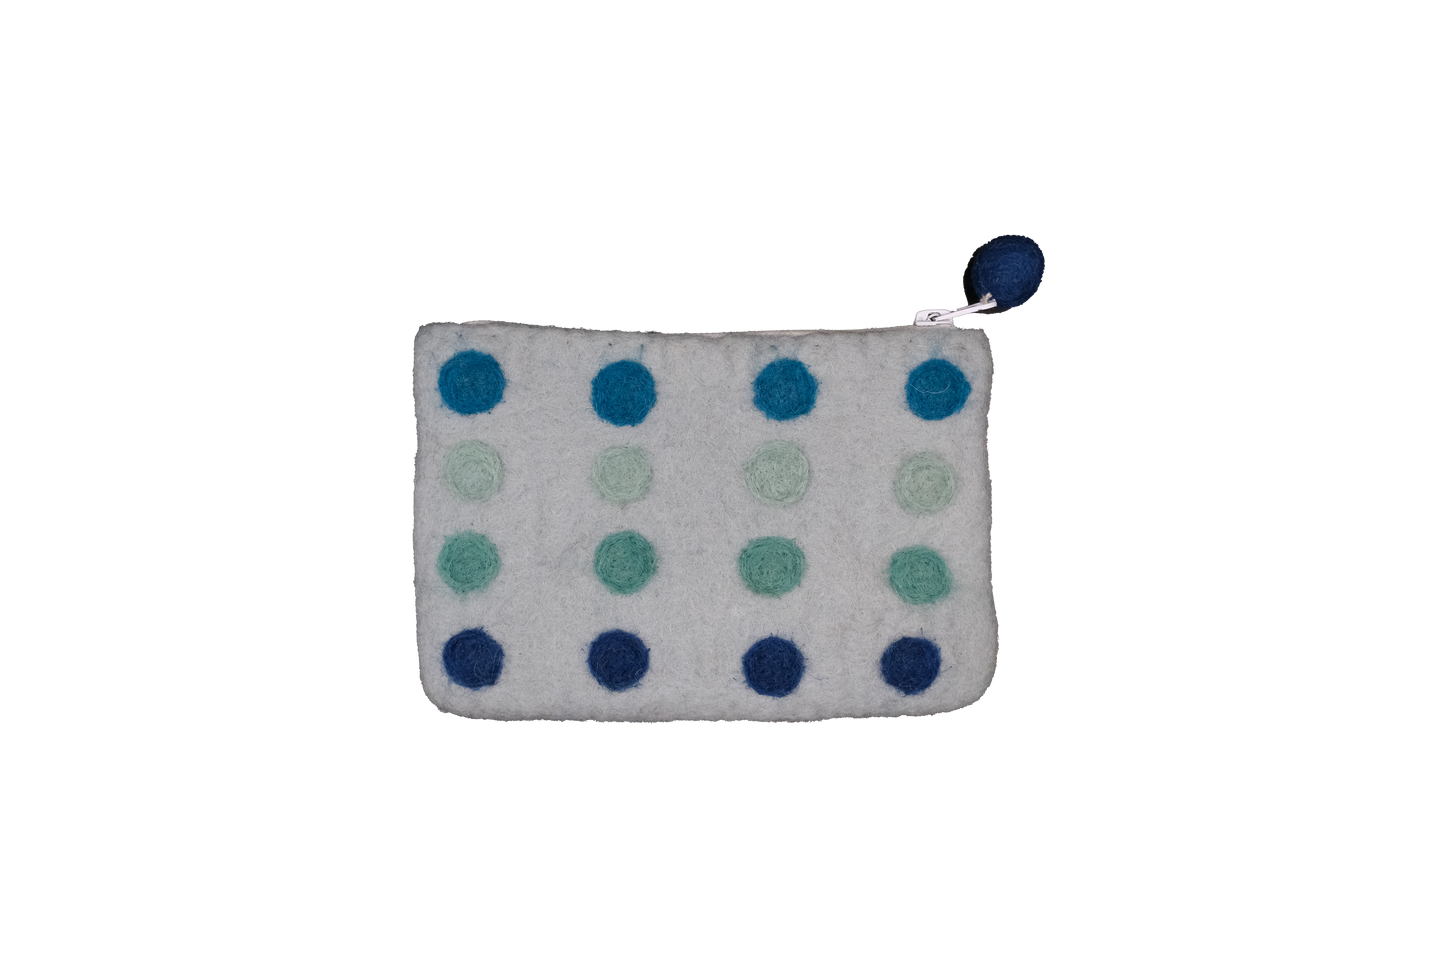 This Global Groove Life, handmade, ethical, fair trade, eco-friendly, sustainable, blue colored, New Zealand wool zipper coin purse was created by artisans in Kathmandu Nepal and is adorned with a polka dot motif and a pom pom zipper pull.